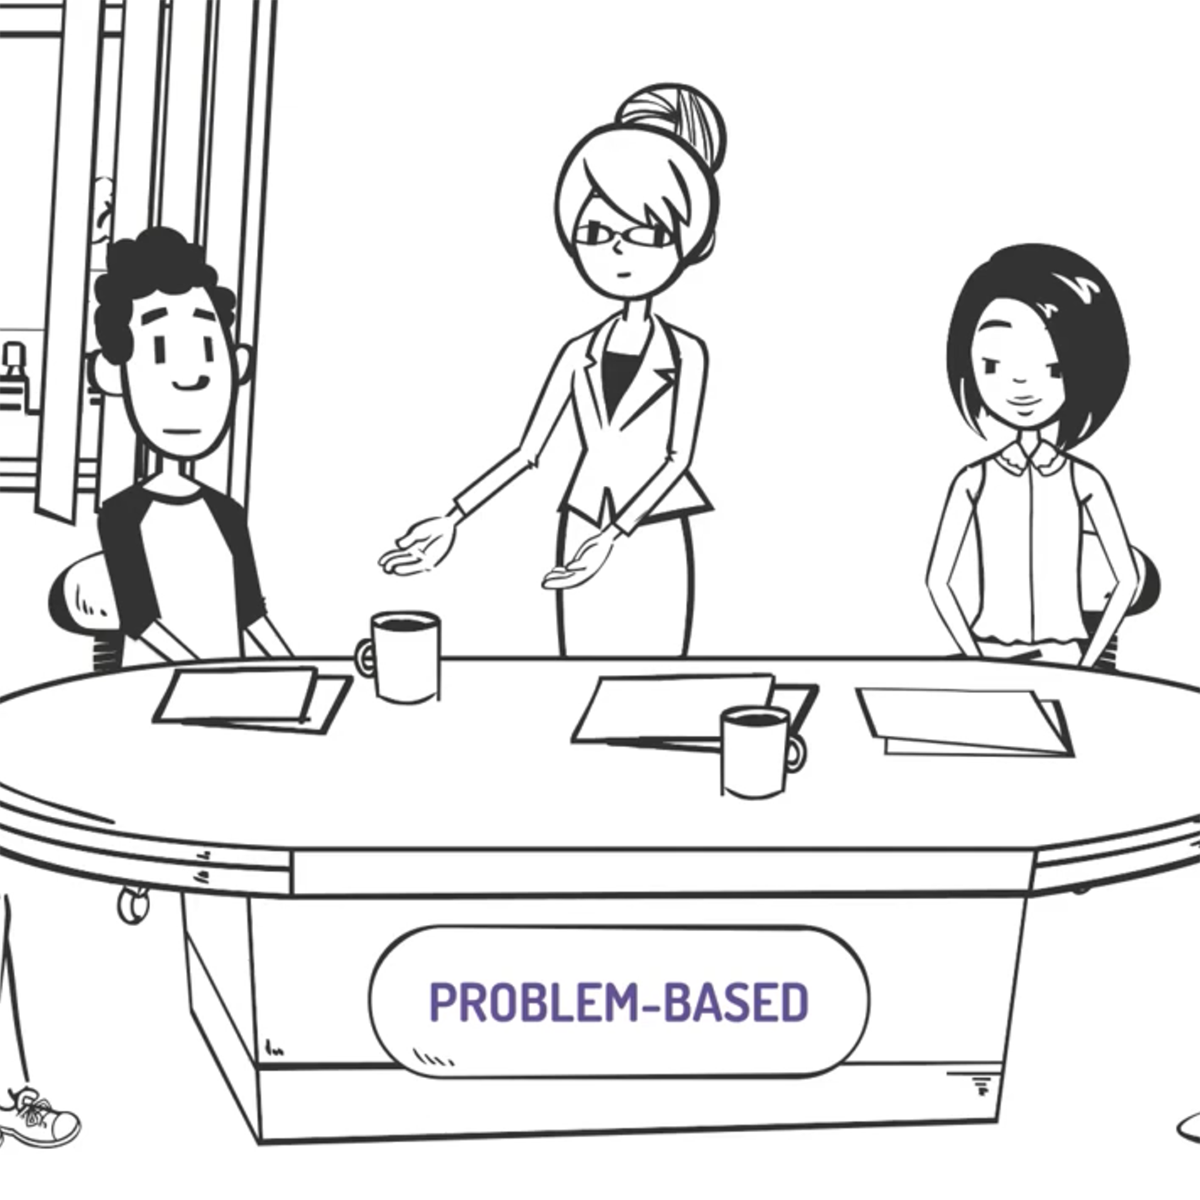 Illustration of a faculty member teaching two students with Problem Based written on the bottom of the image